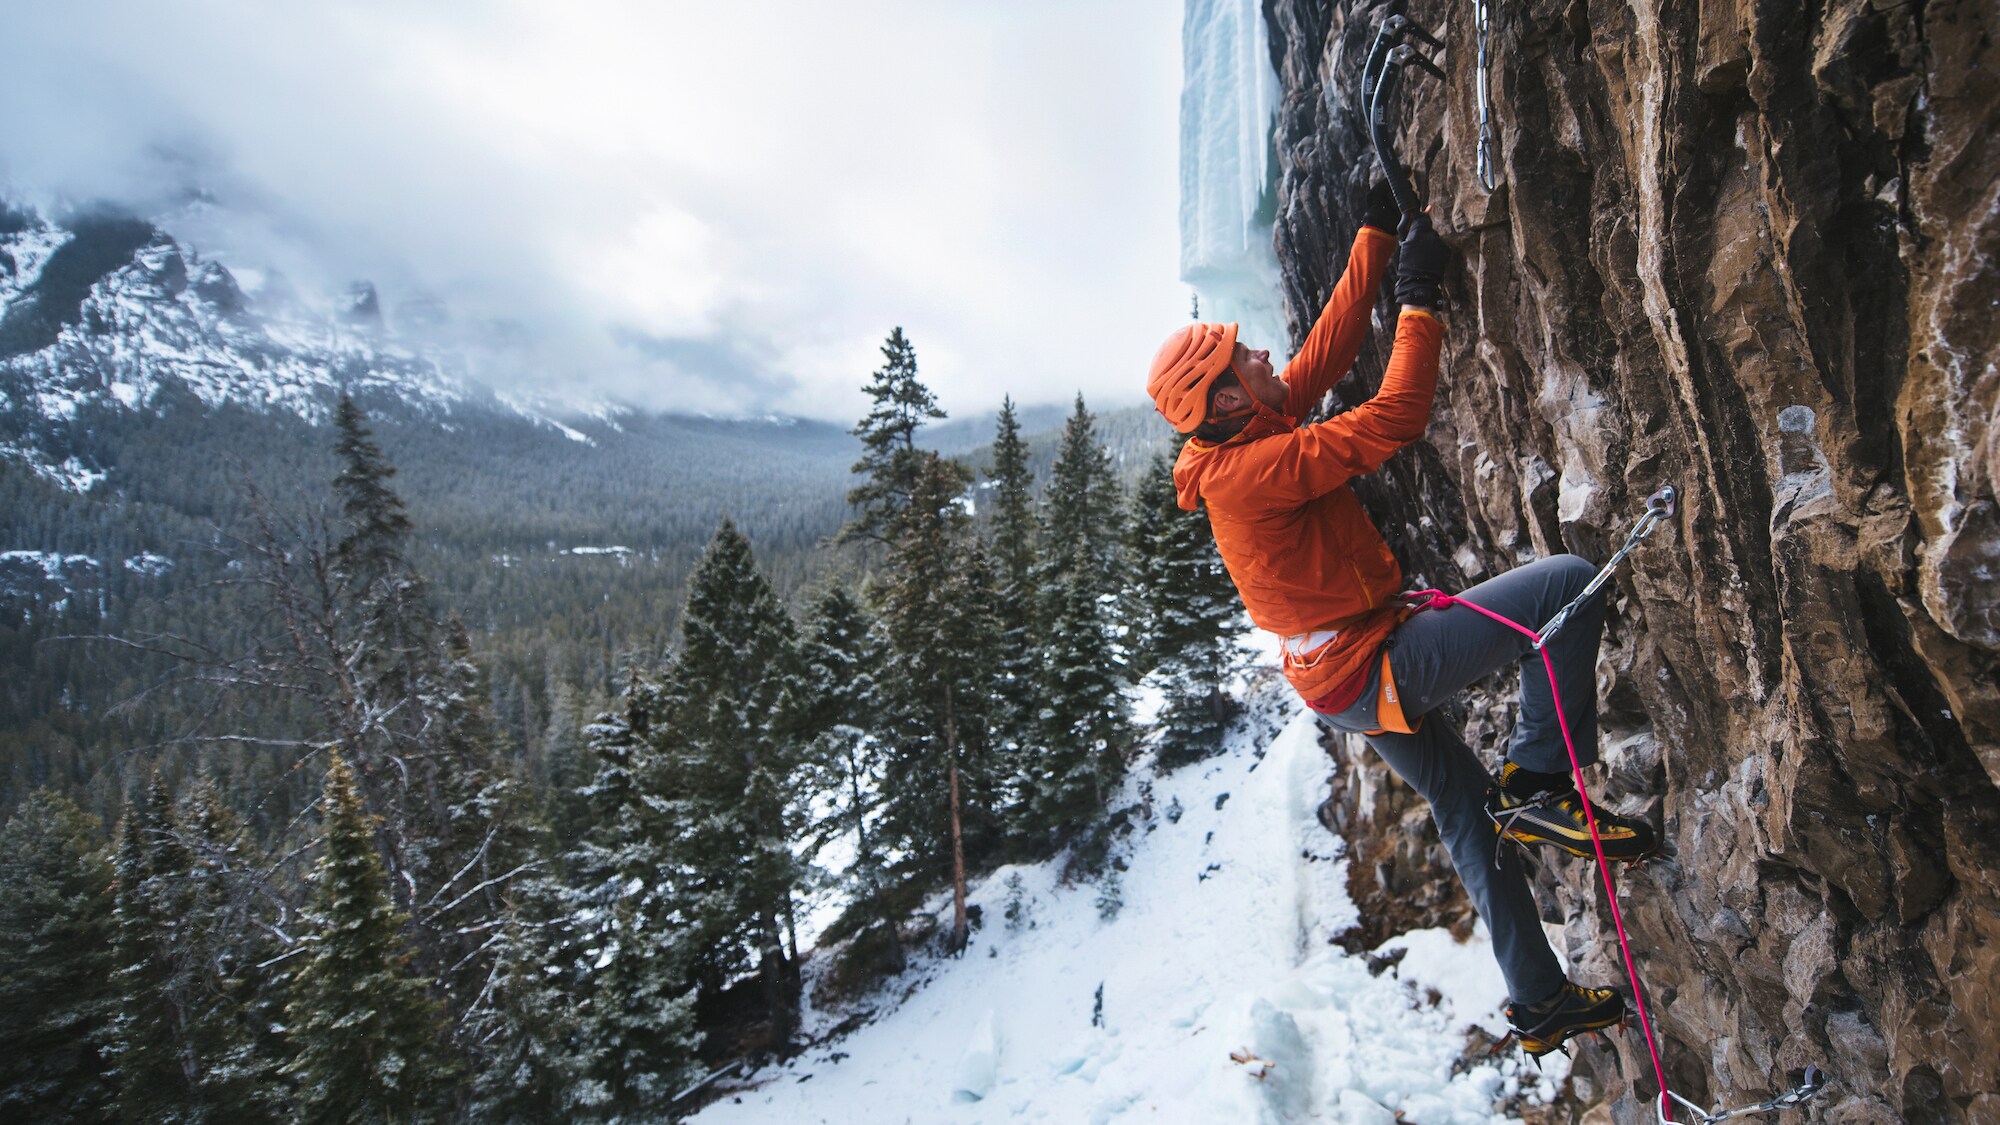 Conrad Anker ice climbing up Hyalite outside of Bozeman, Montana. (Credit: Max Lowe)